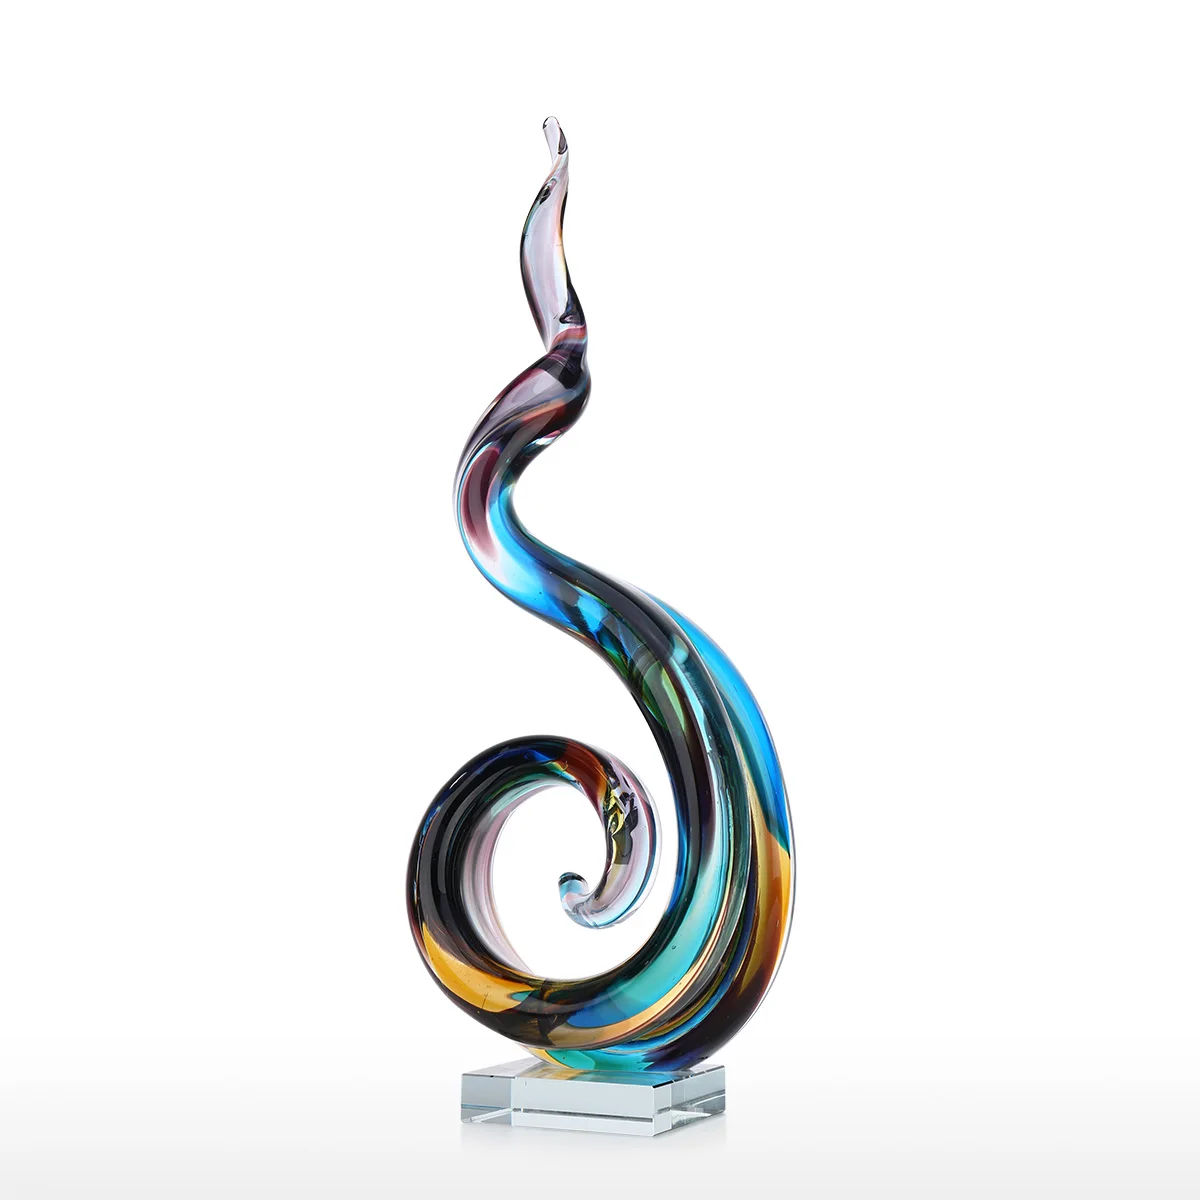 

Tooarts Abstract Glass Sculpture Handmade Glass Figurine Ornament for Office Home Decoration Modern Decorative Tabletop Artwork